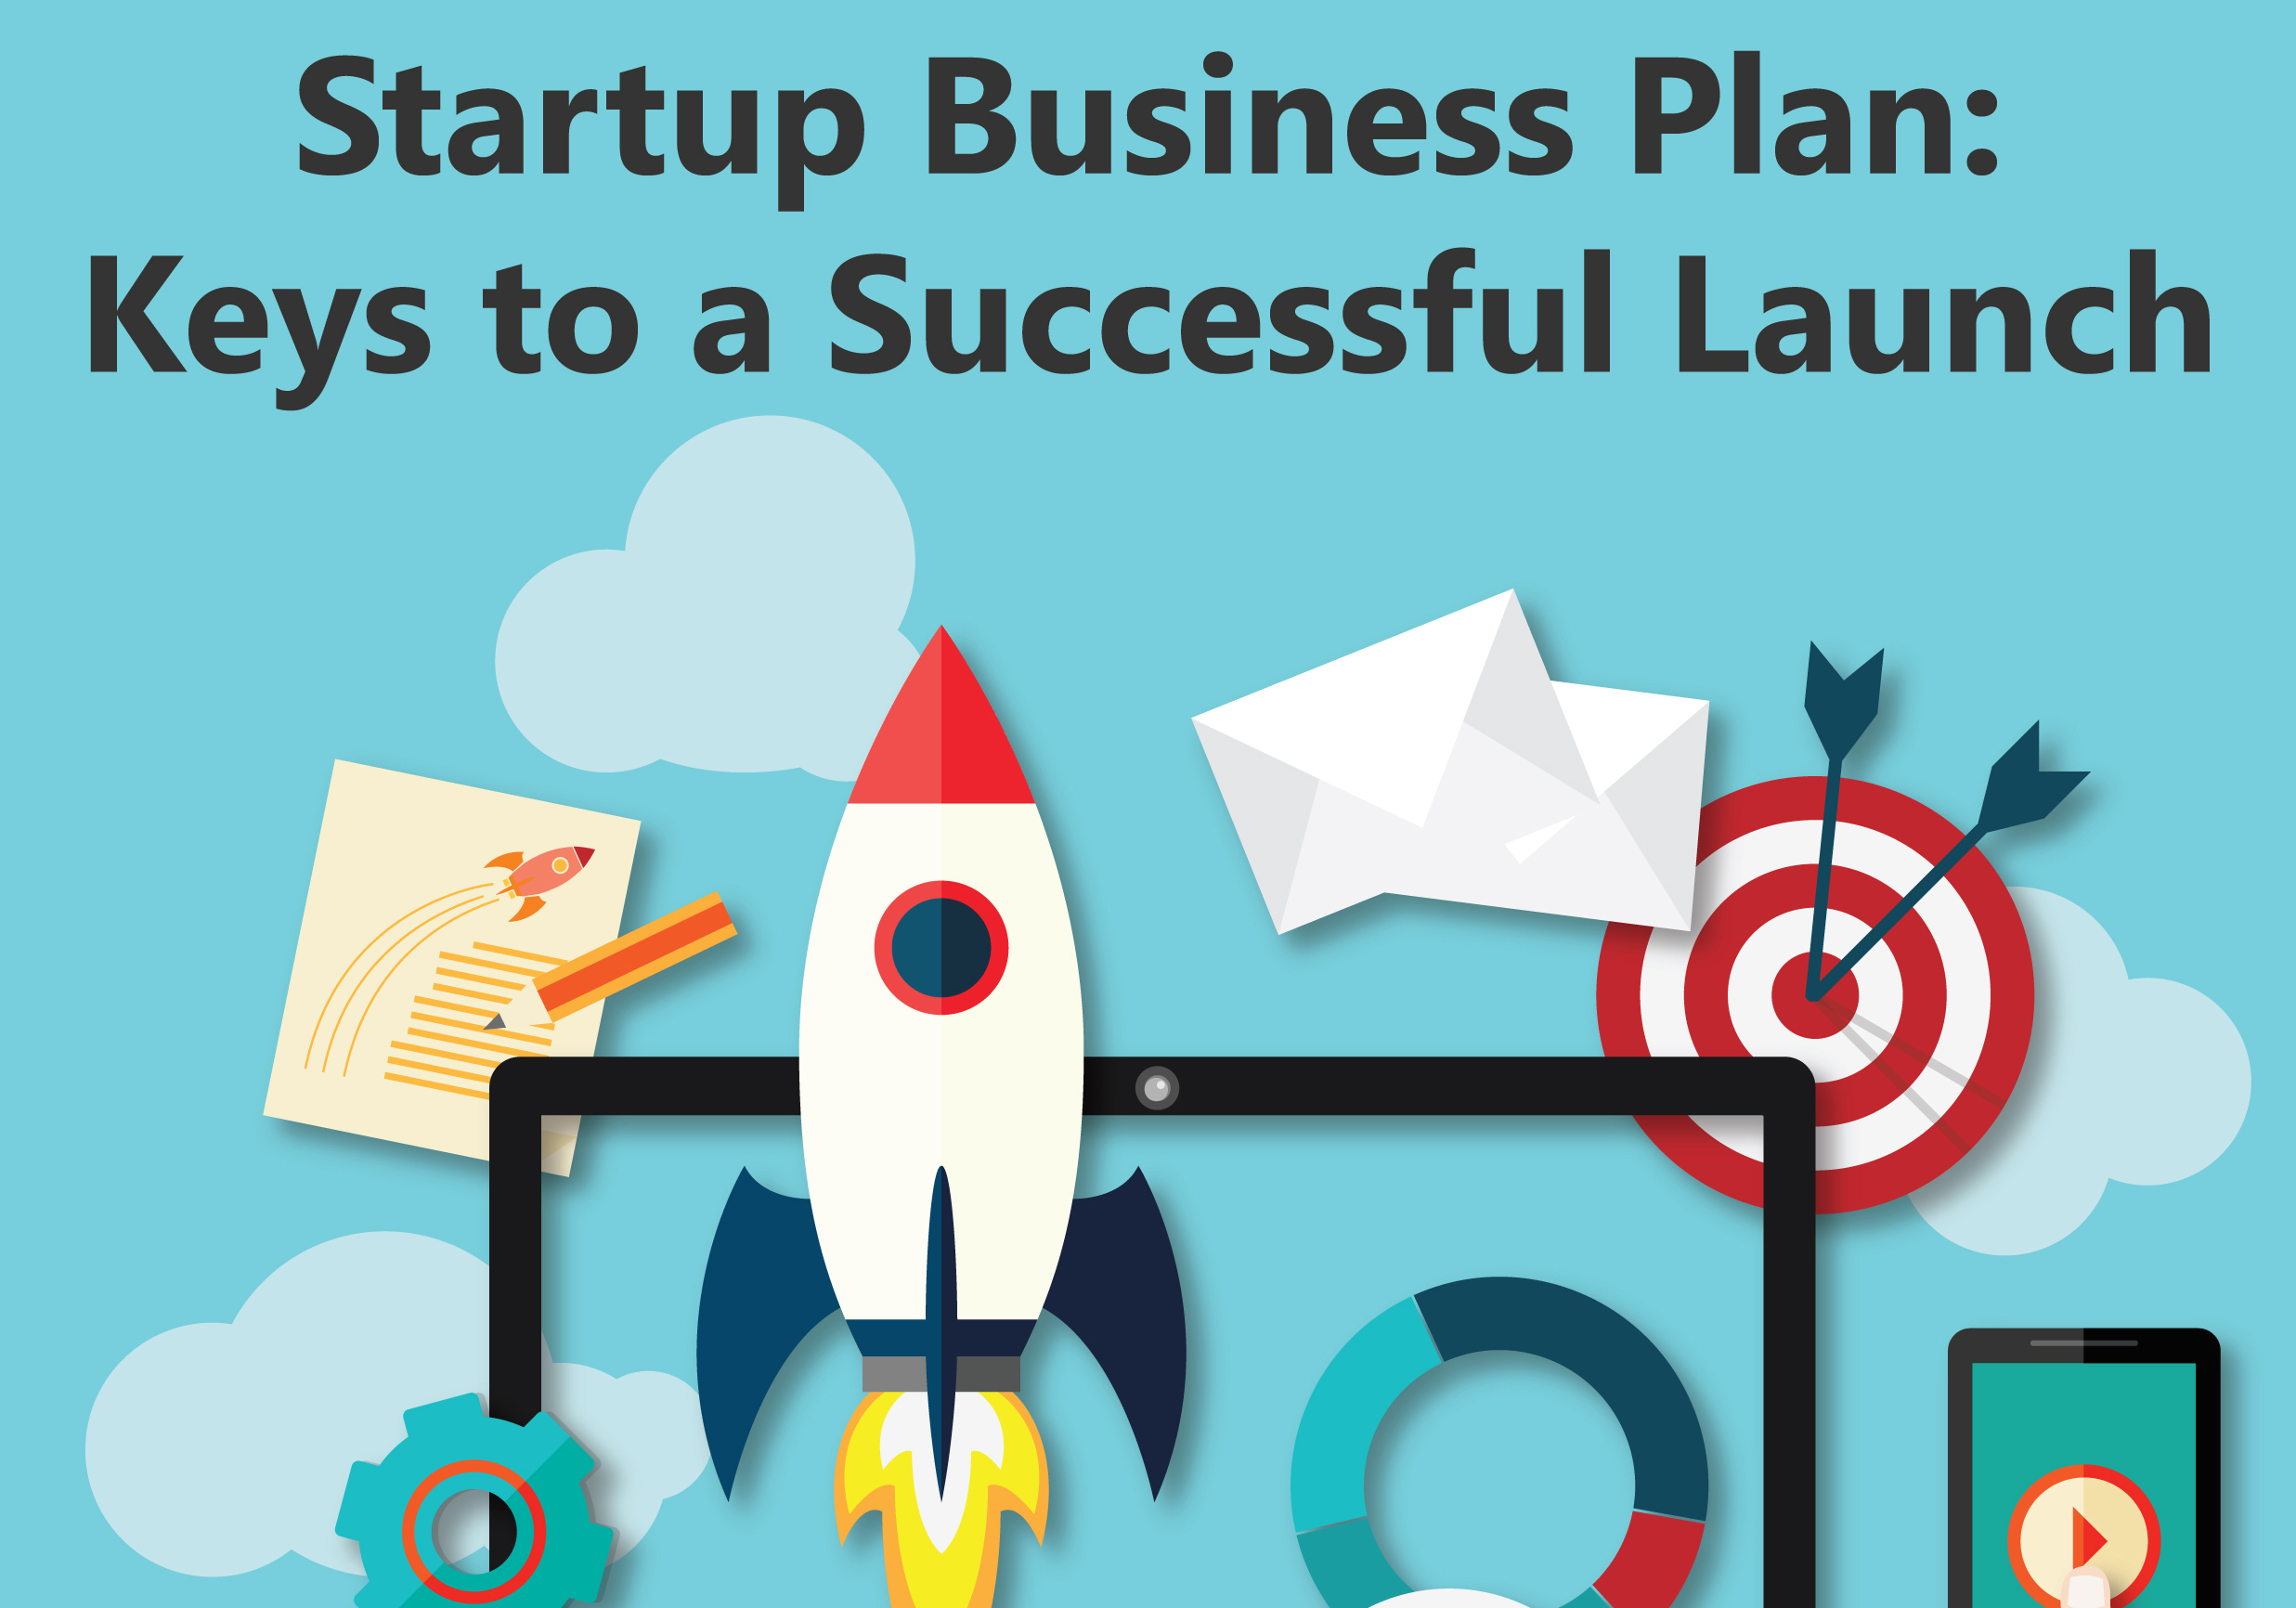 Startup Business Plan: Keys to a Successful Launch